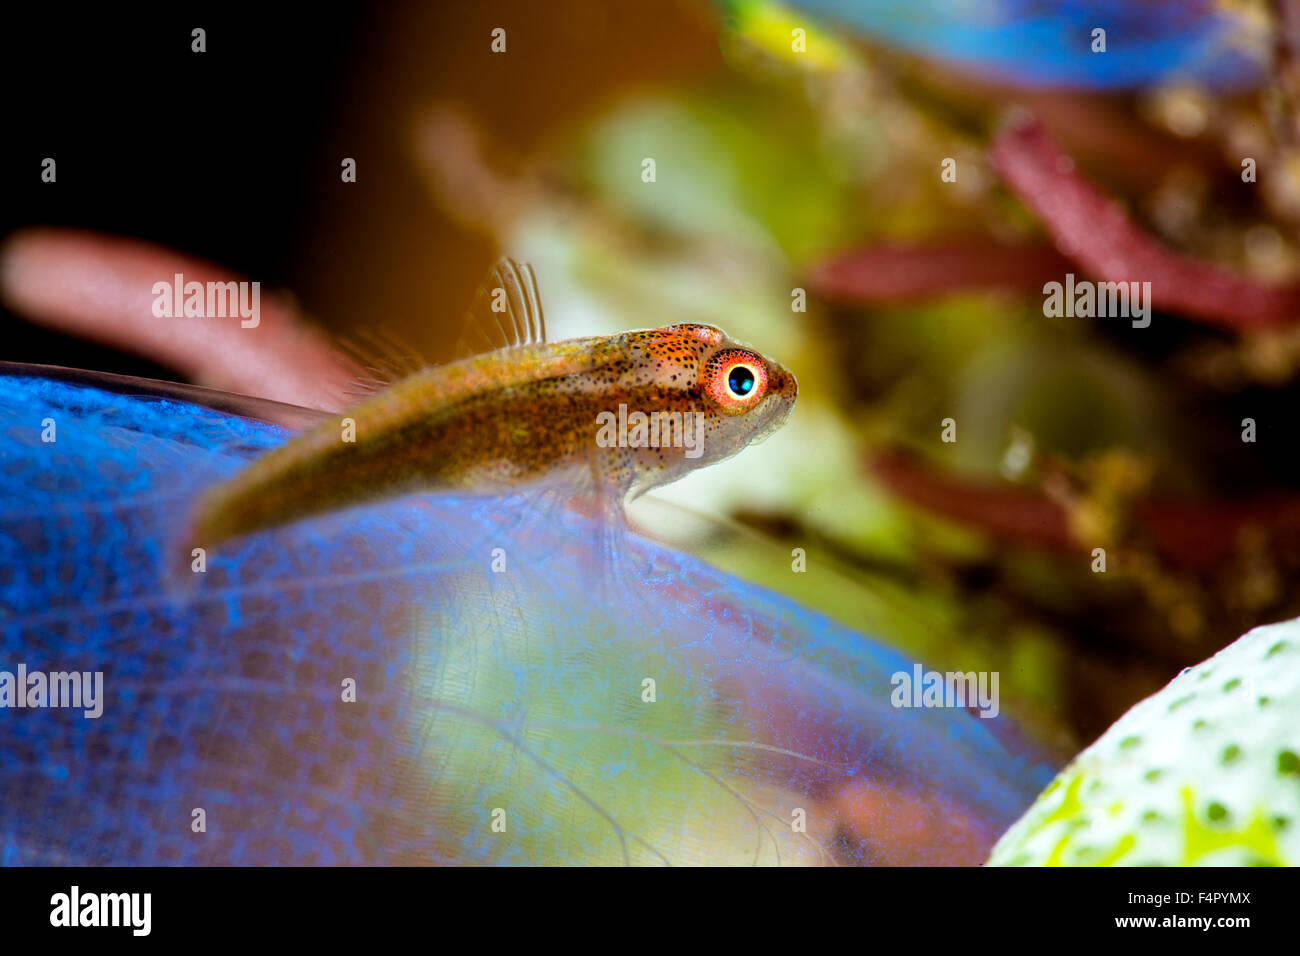 Tiny Goby Sitting on top of Transparent Blue Sea Squirt Stock Photo